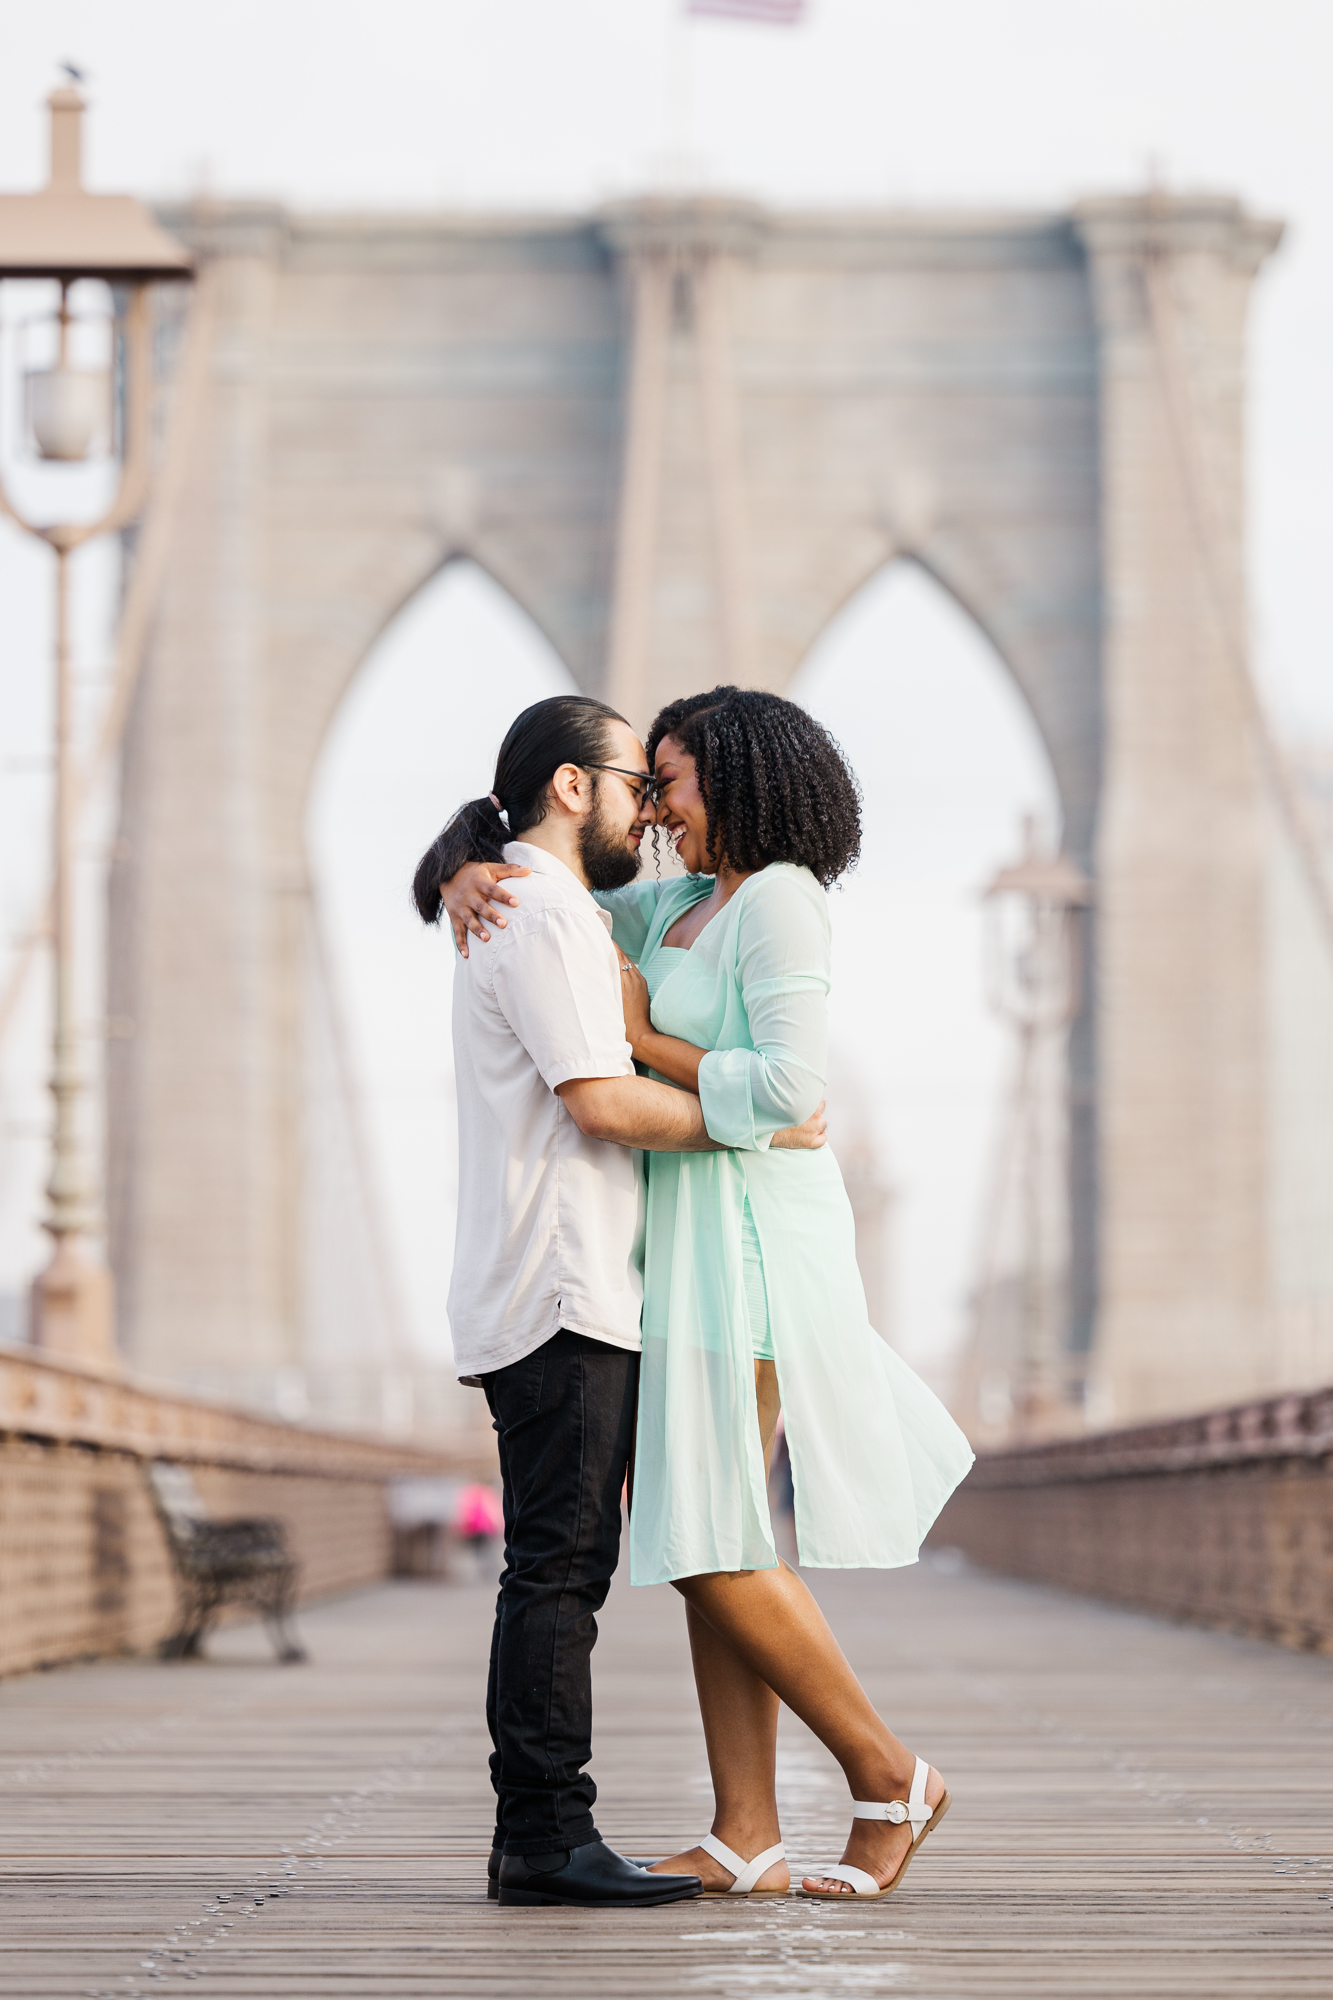 Perfect Summer Engagement Photo Shoot in New York